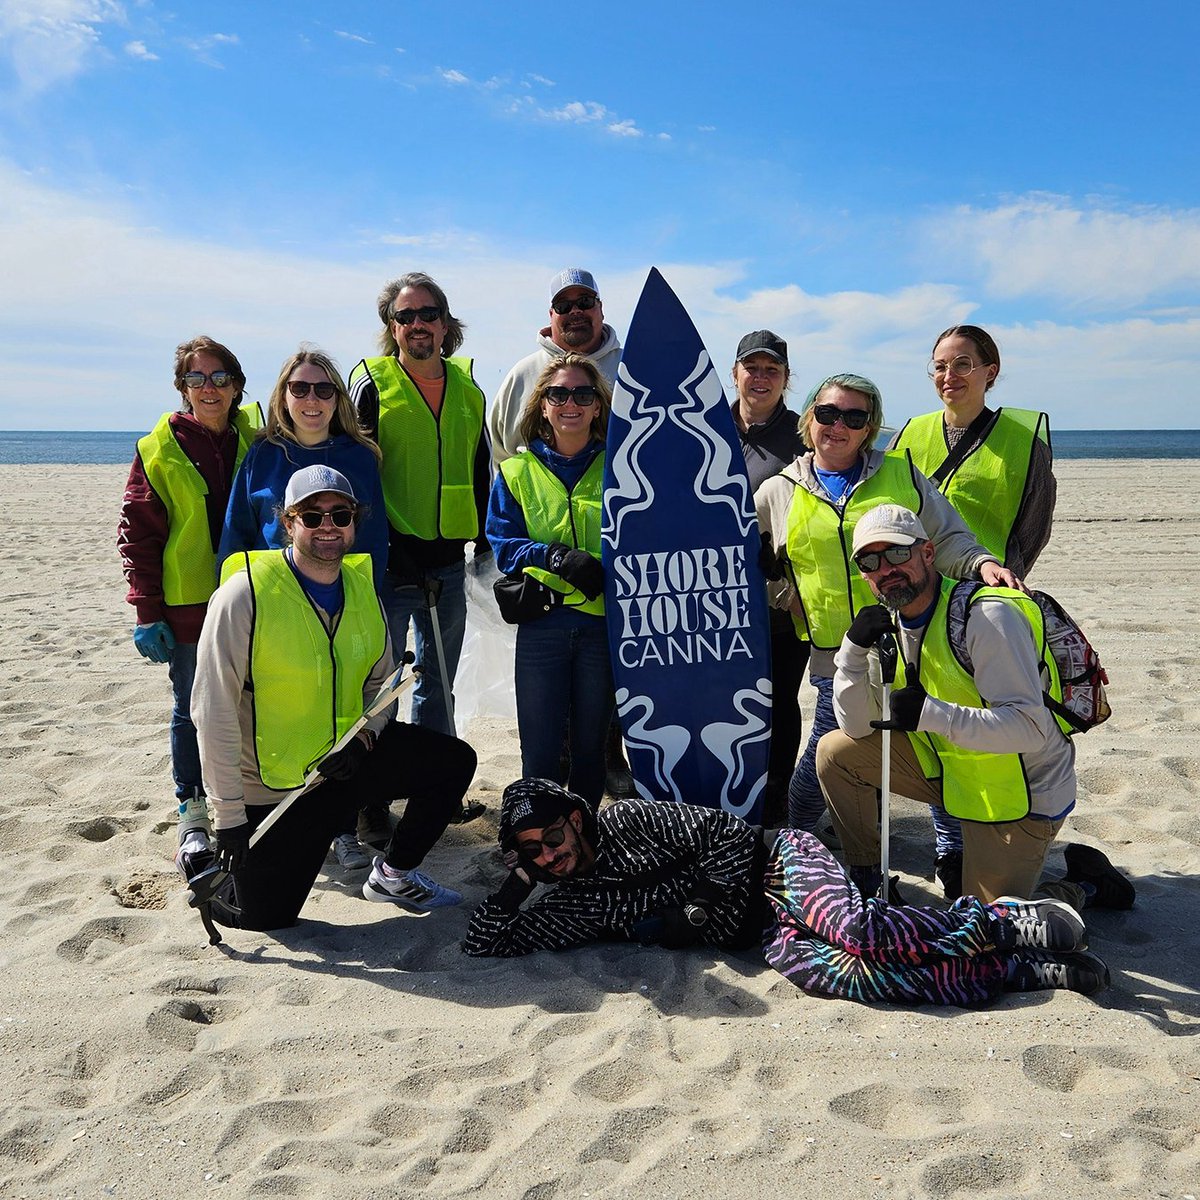 To celebrate Earth Day and our 6 month anniversary, our team held a beach clean-up between Cove Beach and Wilmington Ave in Cape May. It was the perfect way to hang with the gang and show some local love🤙🌎 How did you celebrate?

#earthdayeveryday #capemay #njdispensary